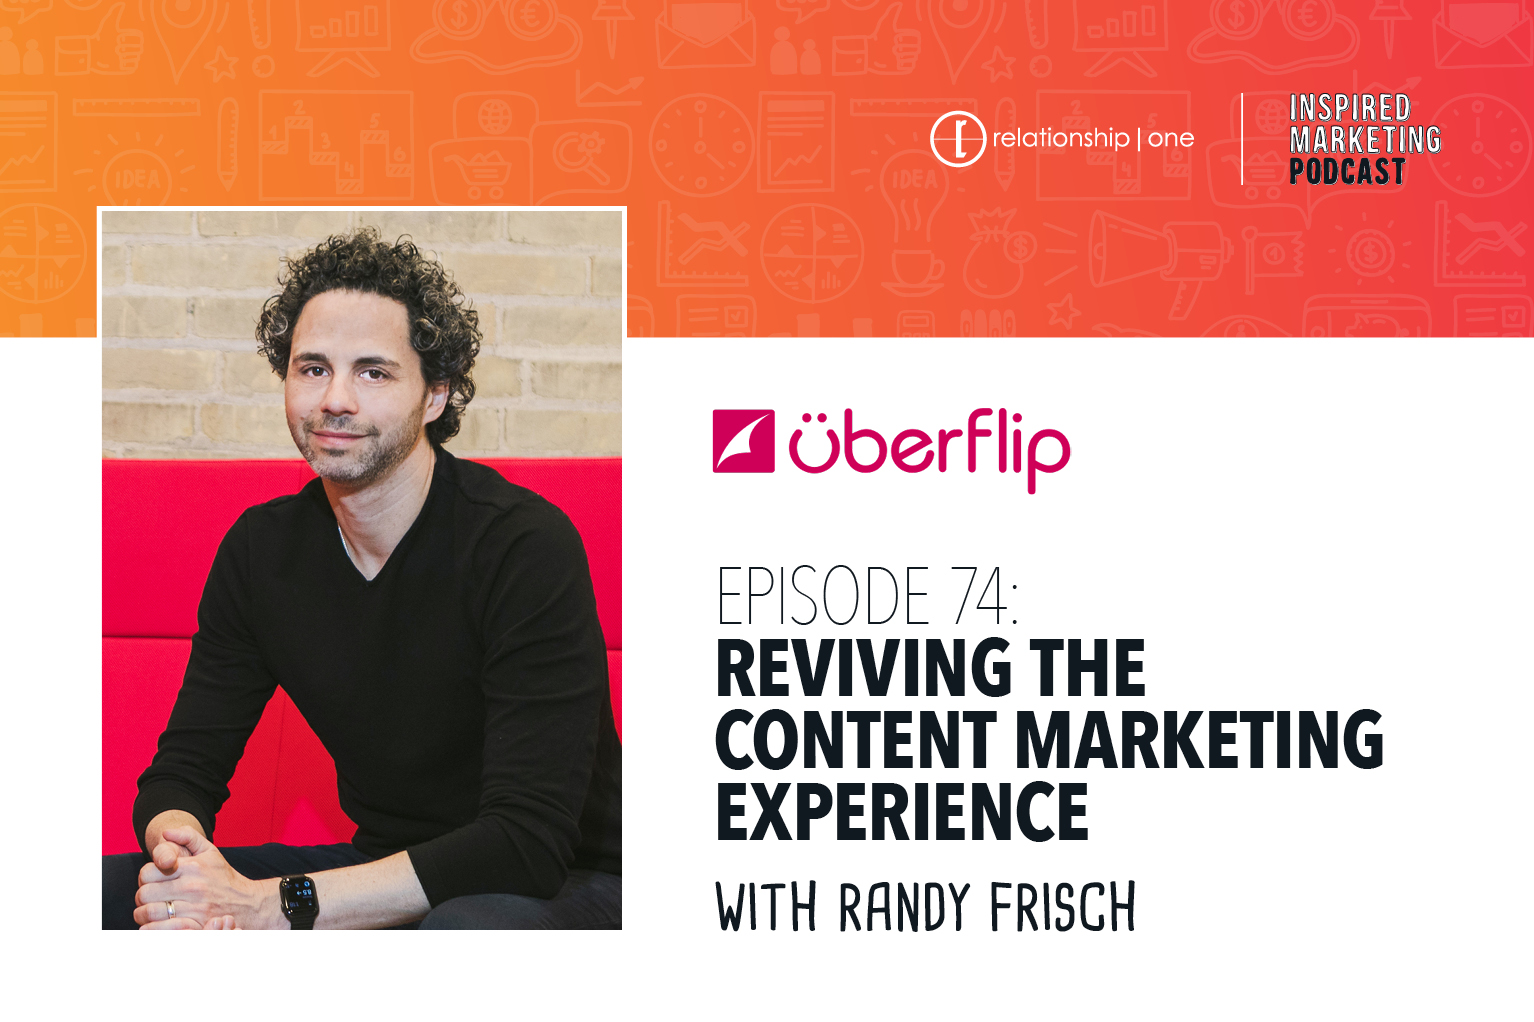 Inspired Marketing: Uberflip’s Randy Frisch on Reviving the Content Marketing Experience